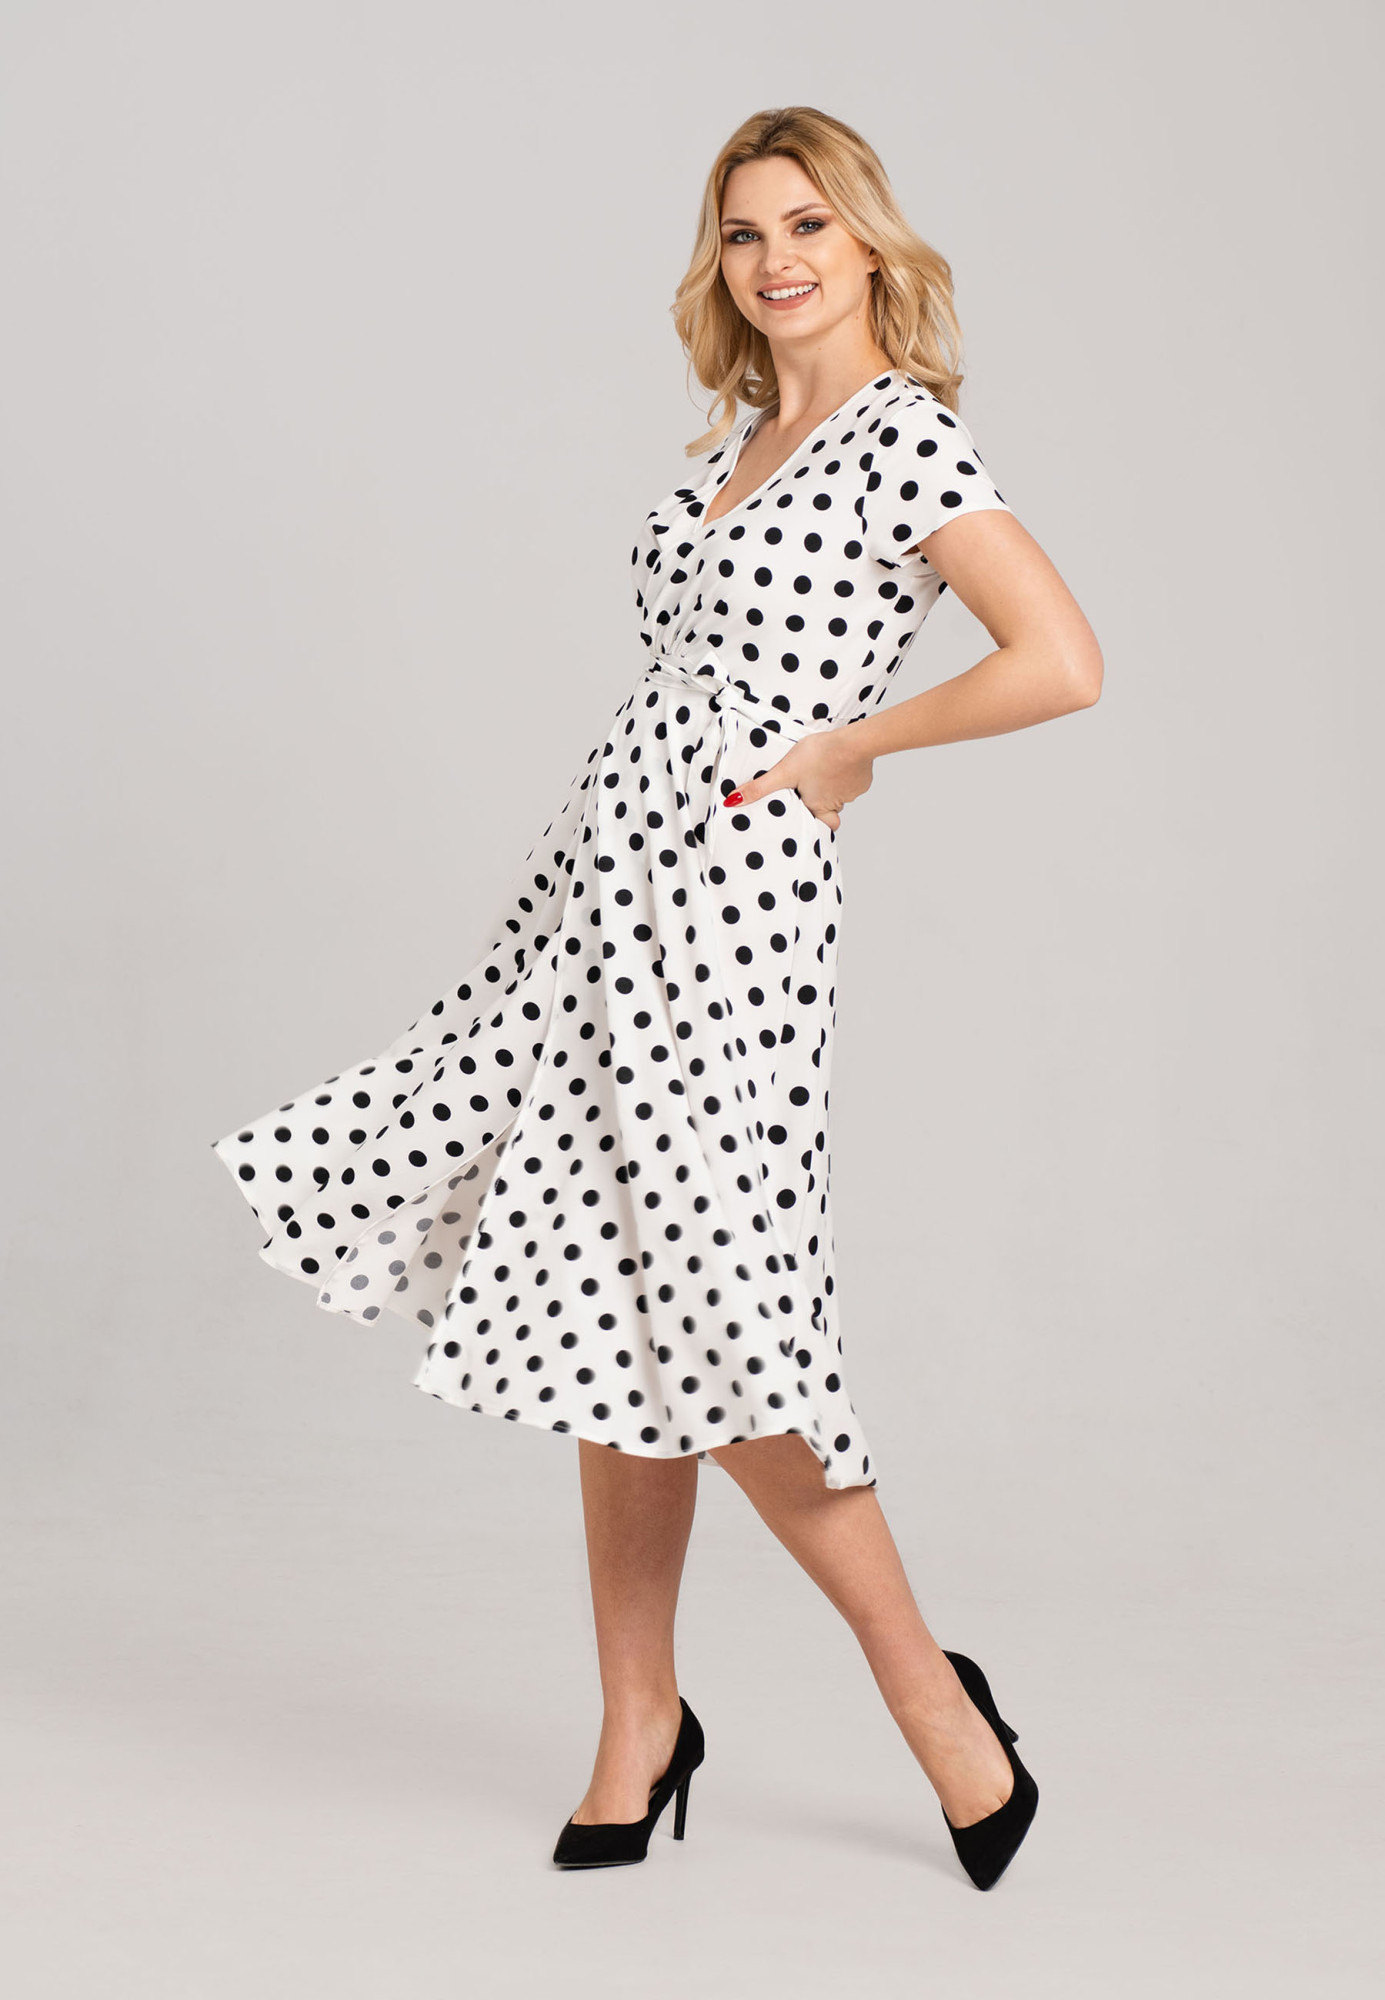 Look Made With Love Šaty N20 Polka Dots Black/White S